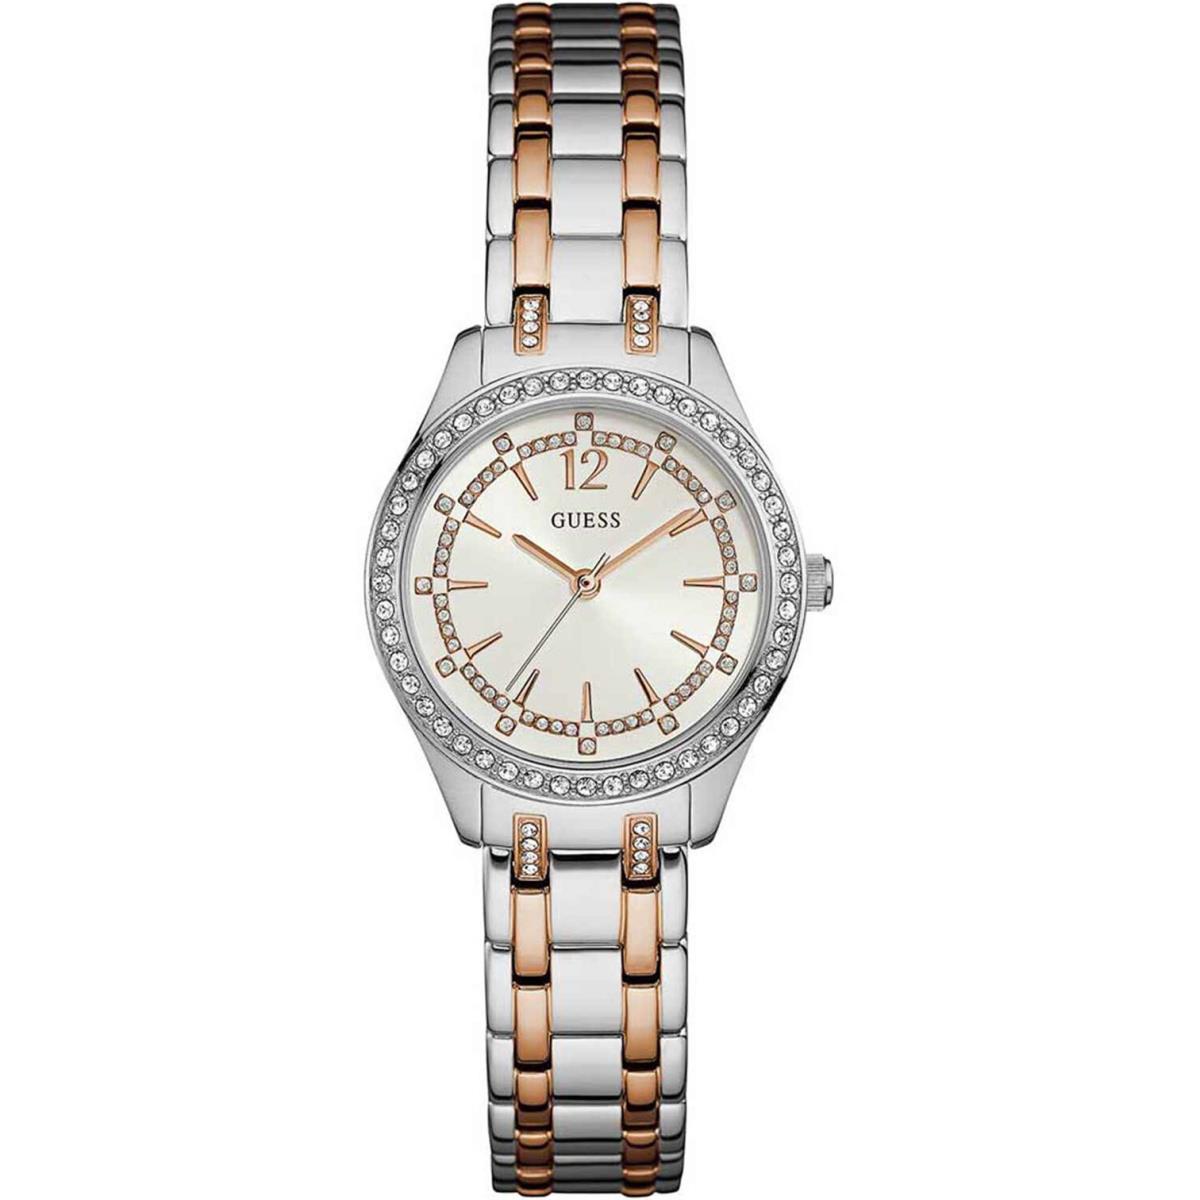 Guess W0830L1 Lady Dress Stainless Steel Two-tone Crystal Accented Bezel 30m WR